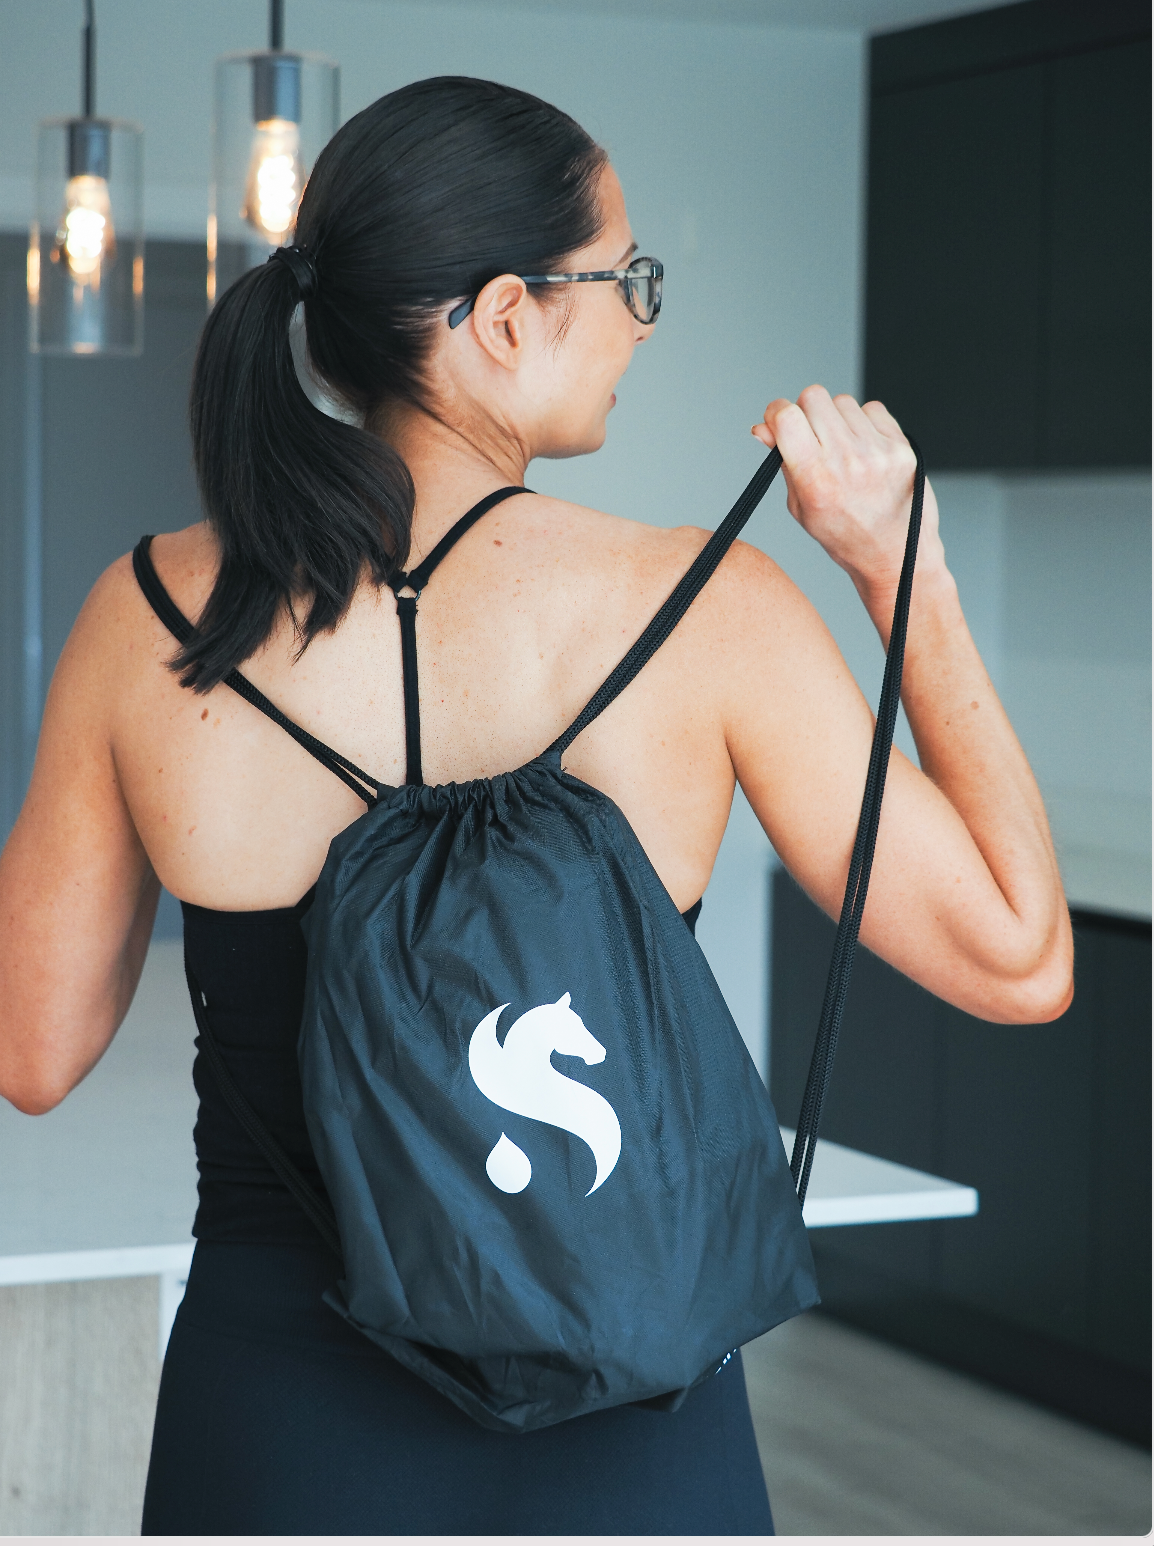 THE SWELL FIT BAG